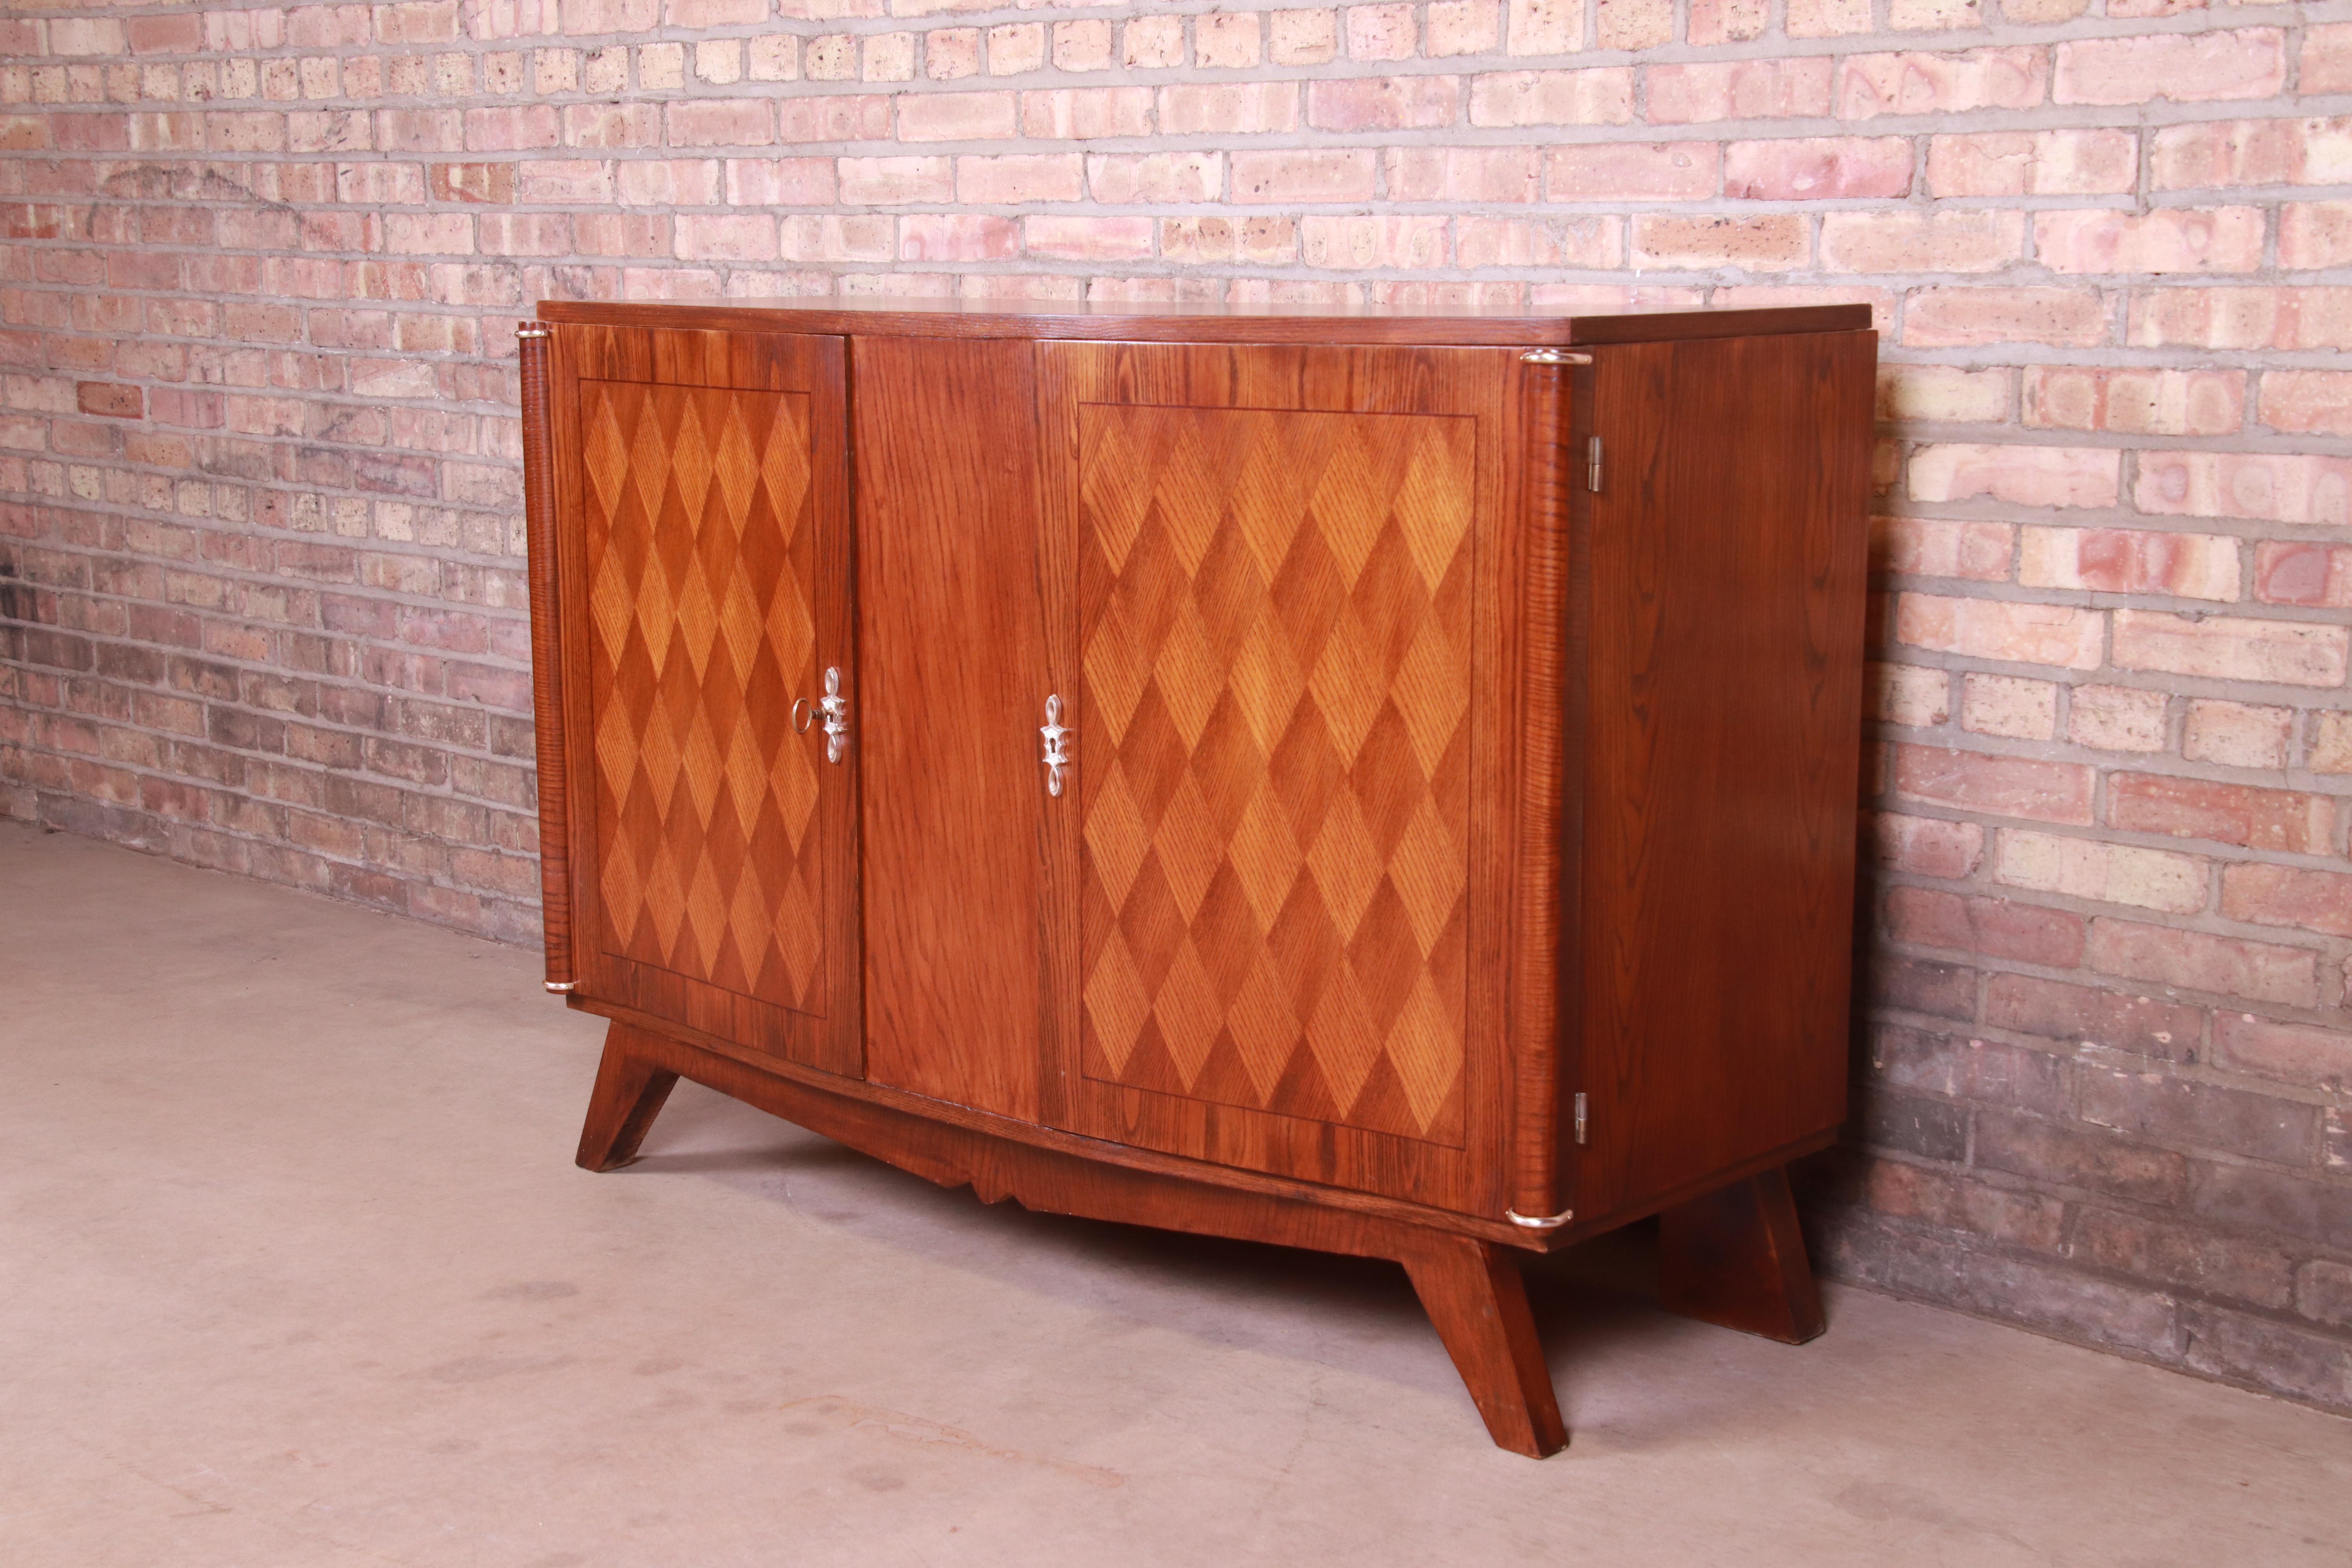 A gorgeous French Art Deco style sideboard or bar cabinet

In the manner of Jules Leleu

20th century

Carved oak, with inlaid parquetry front and original brass hardware. Cabinets lock, and key is included.

Measures: 52.5